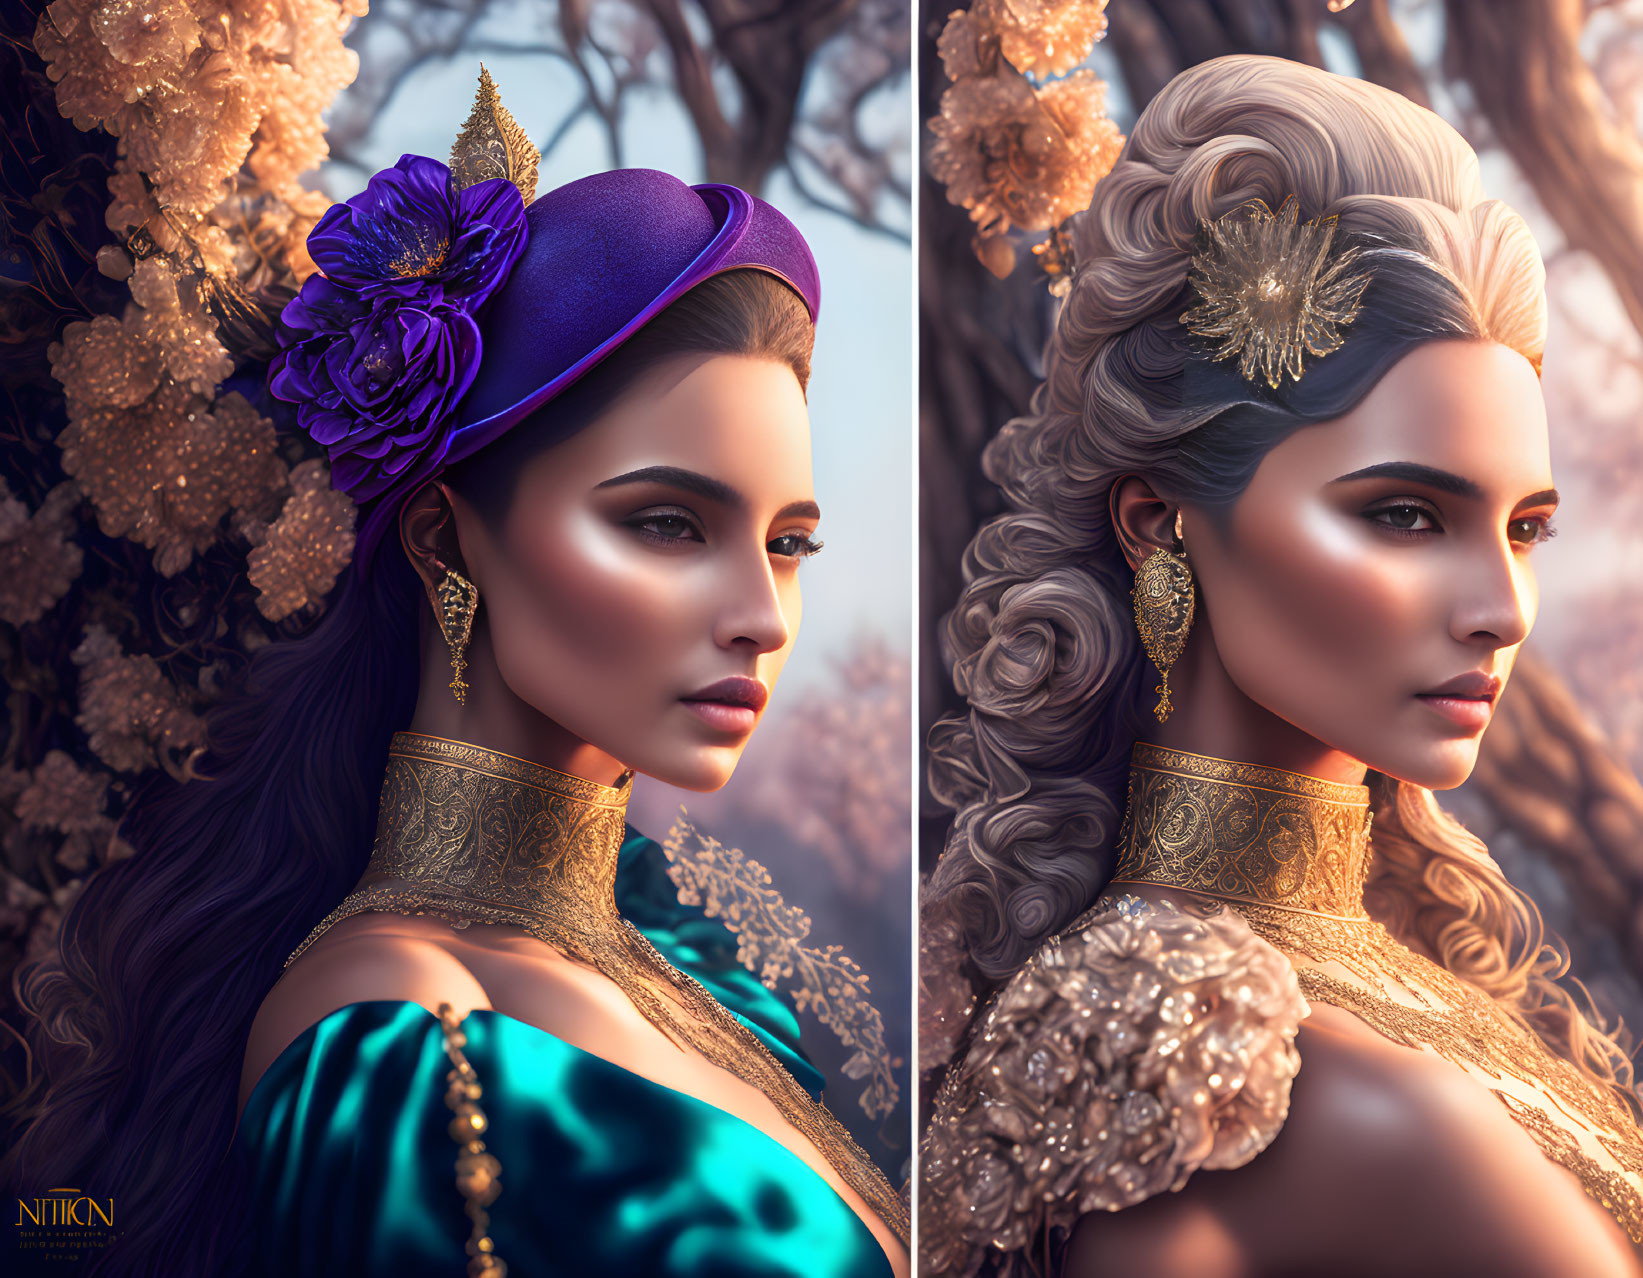 Digital artwork: Woman in two profiles with historical hairstyles & accessories - purple hat with flower & golden head